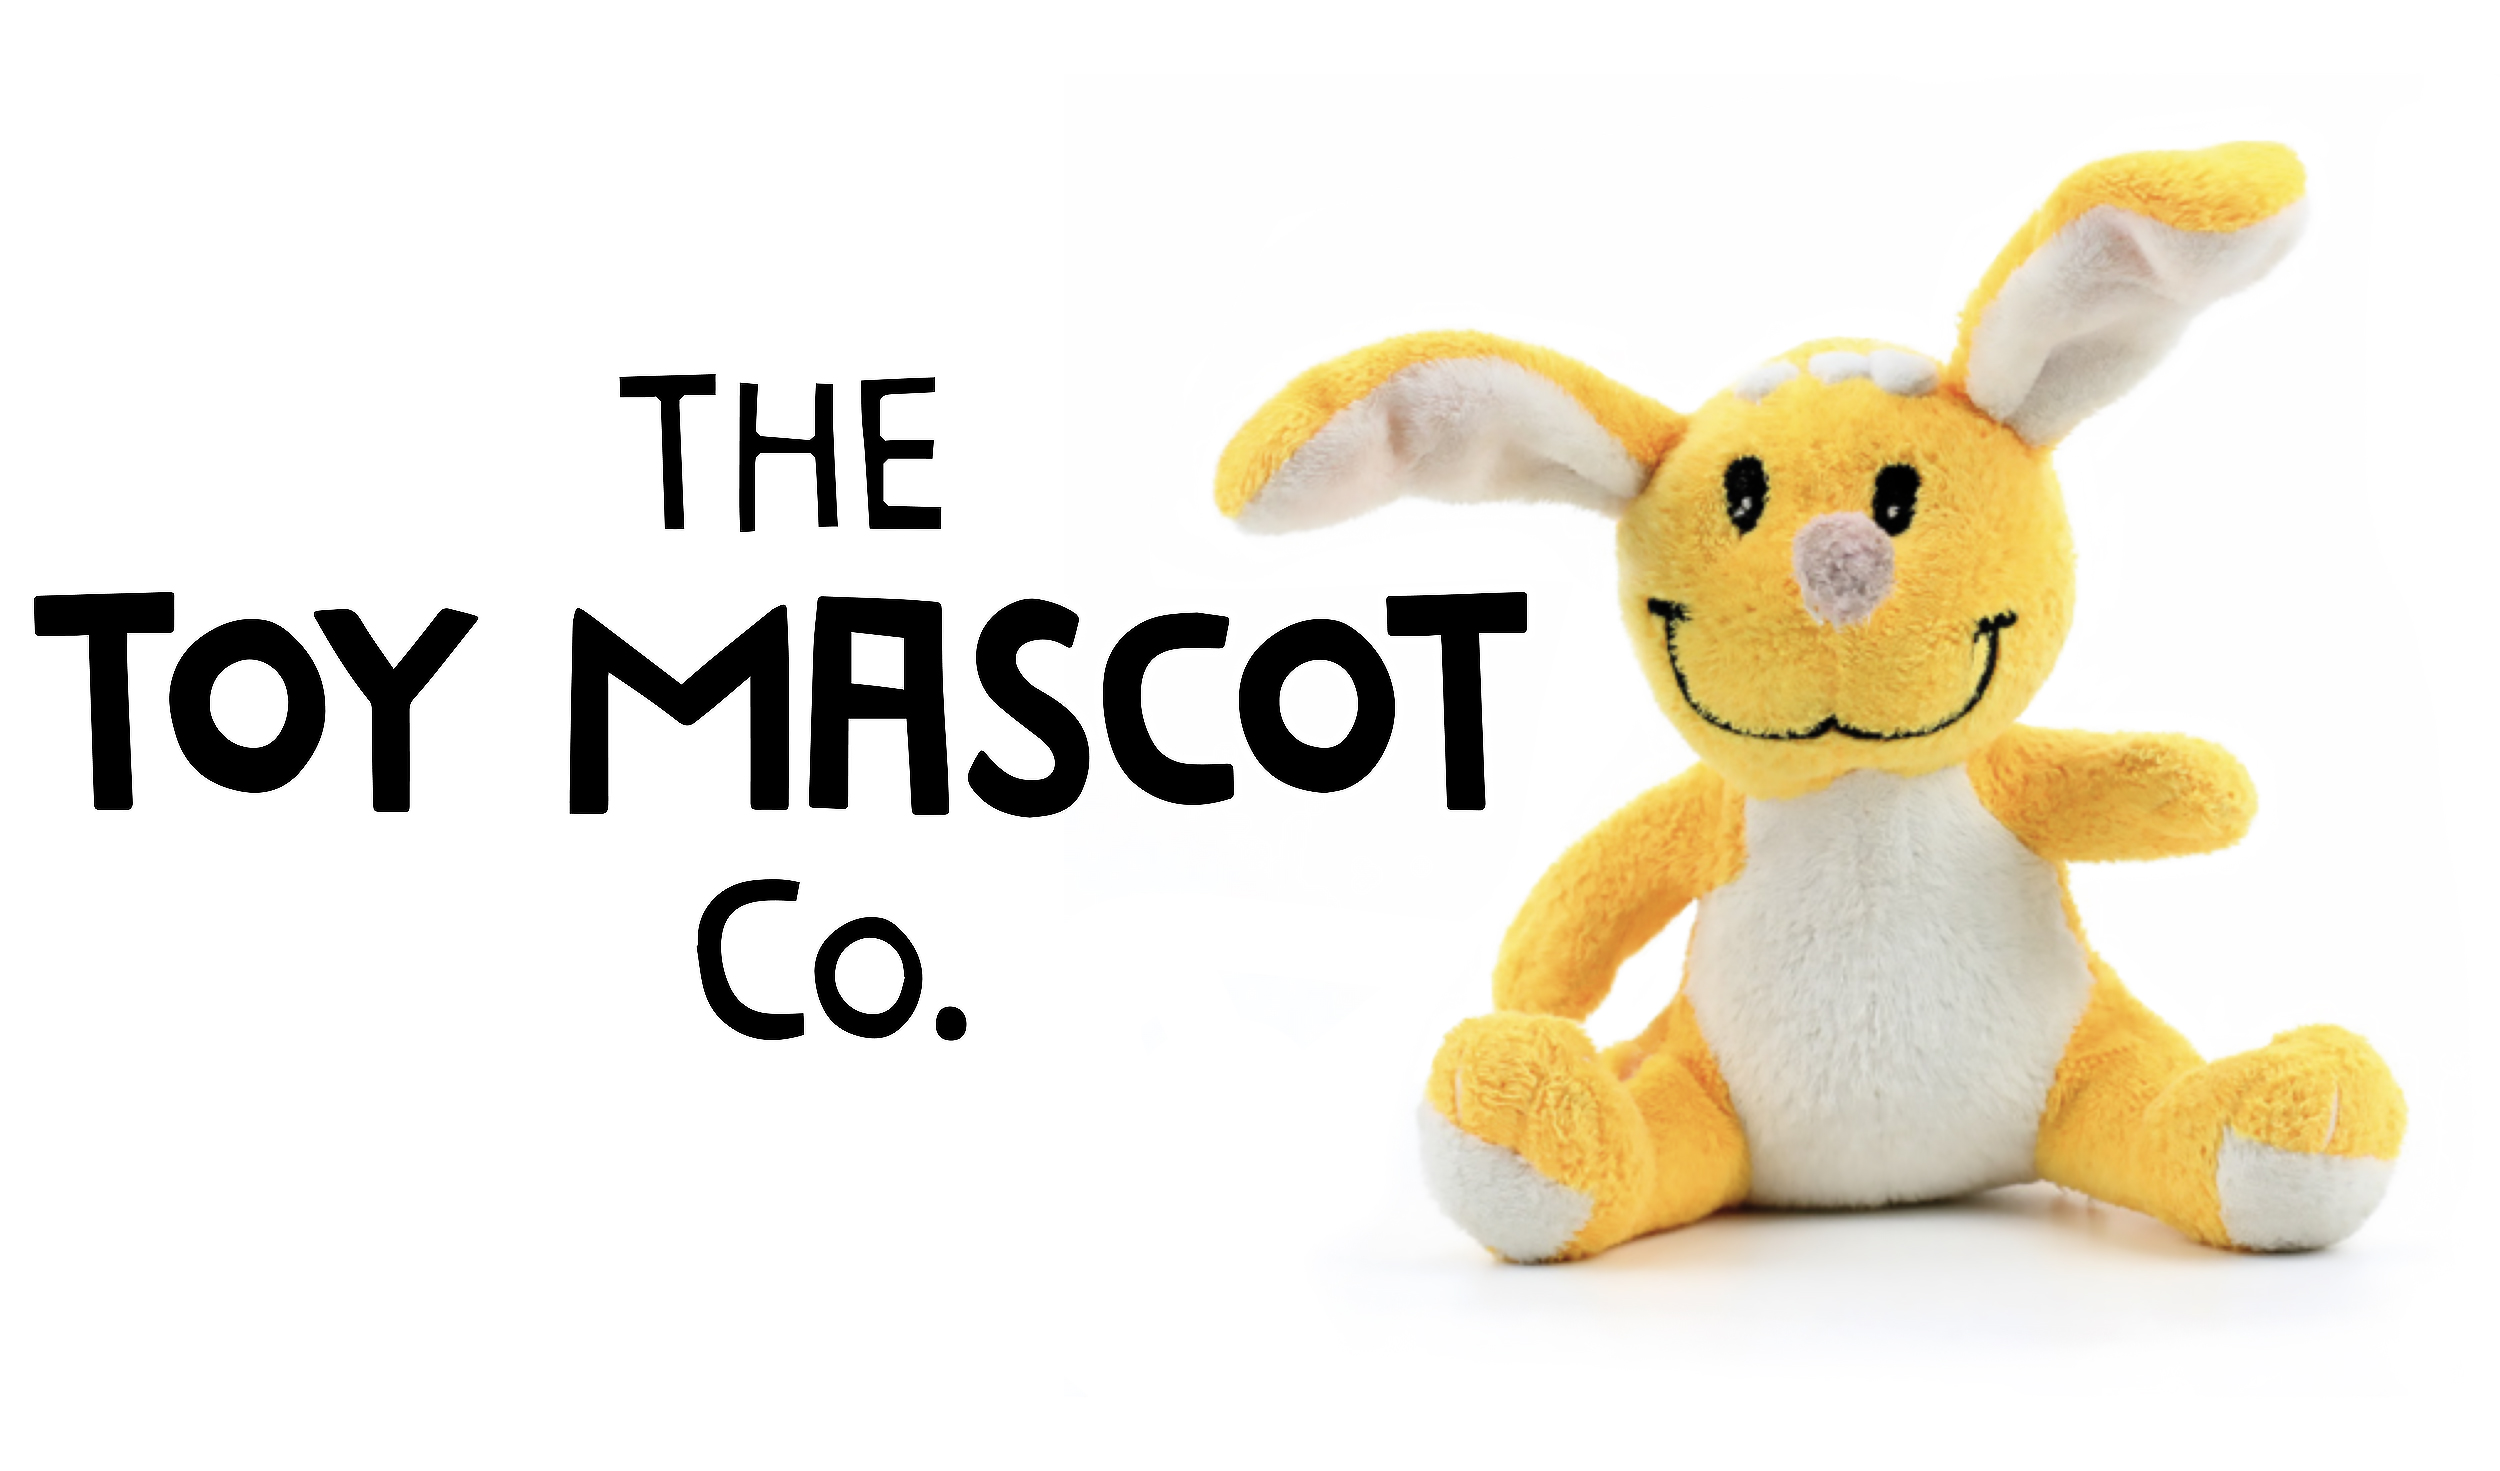 The Toy Mascot Co